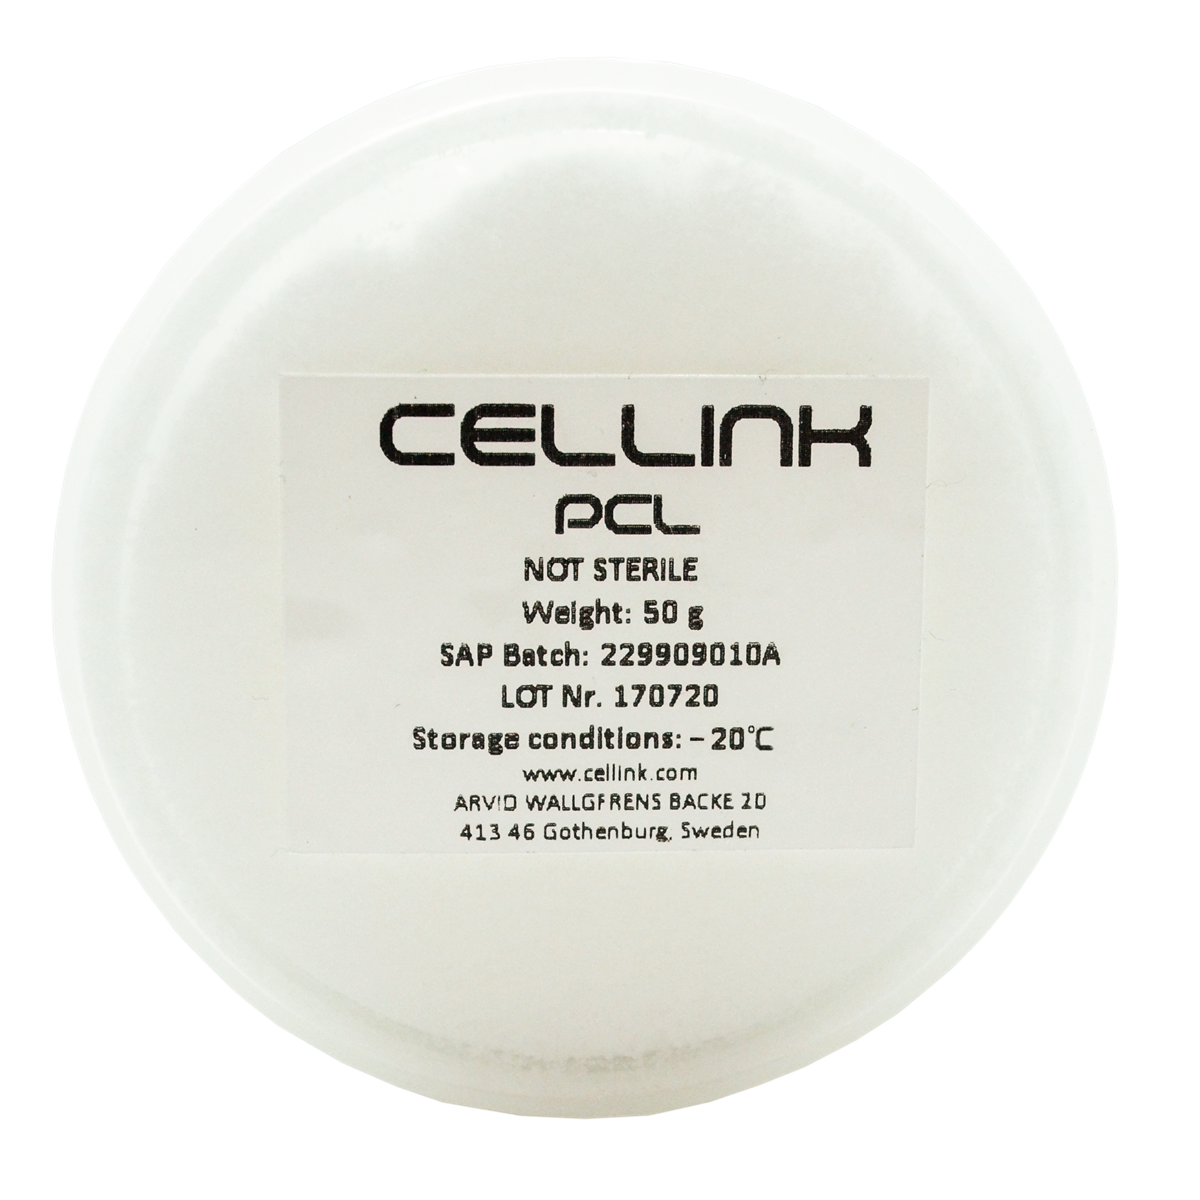 CELLINK PCL 50g